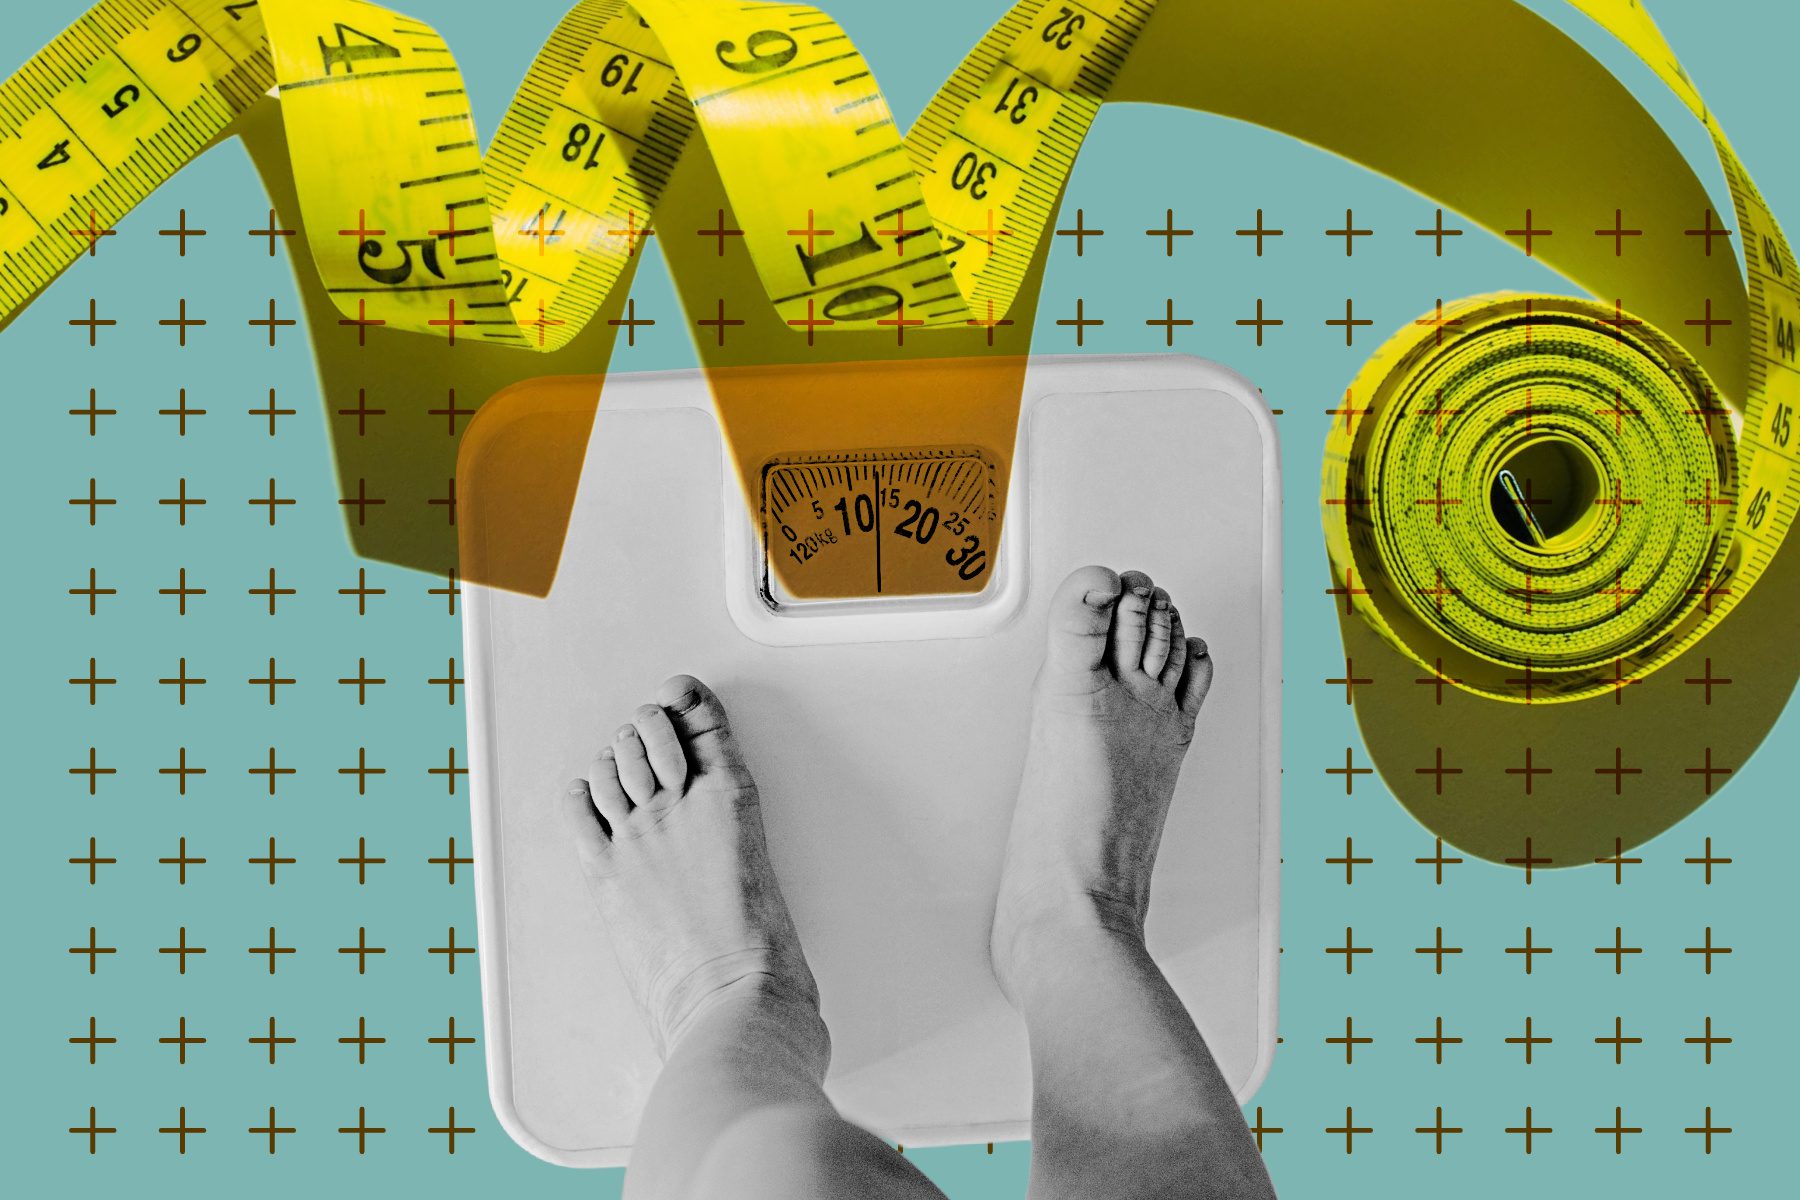 Photocollage showing a child's feel stepping onto a scale, on top of the scale is a tape measure and around the scale are little plus signs.